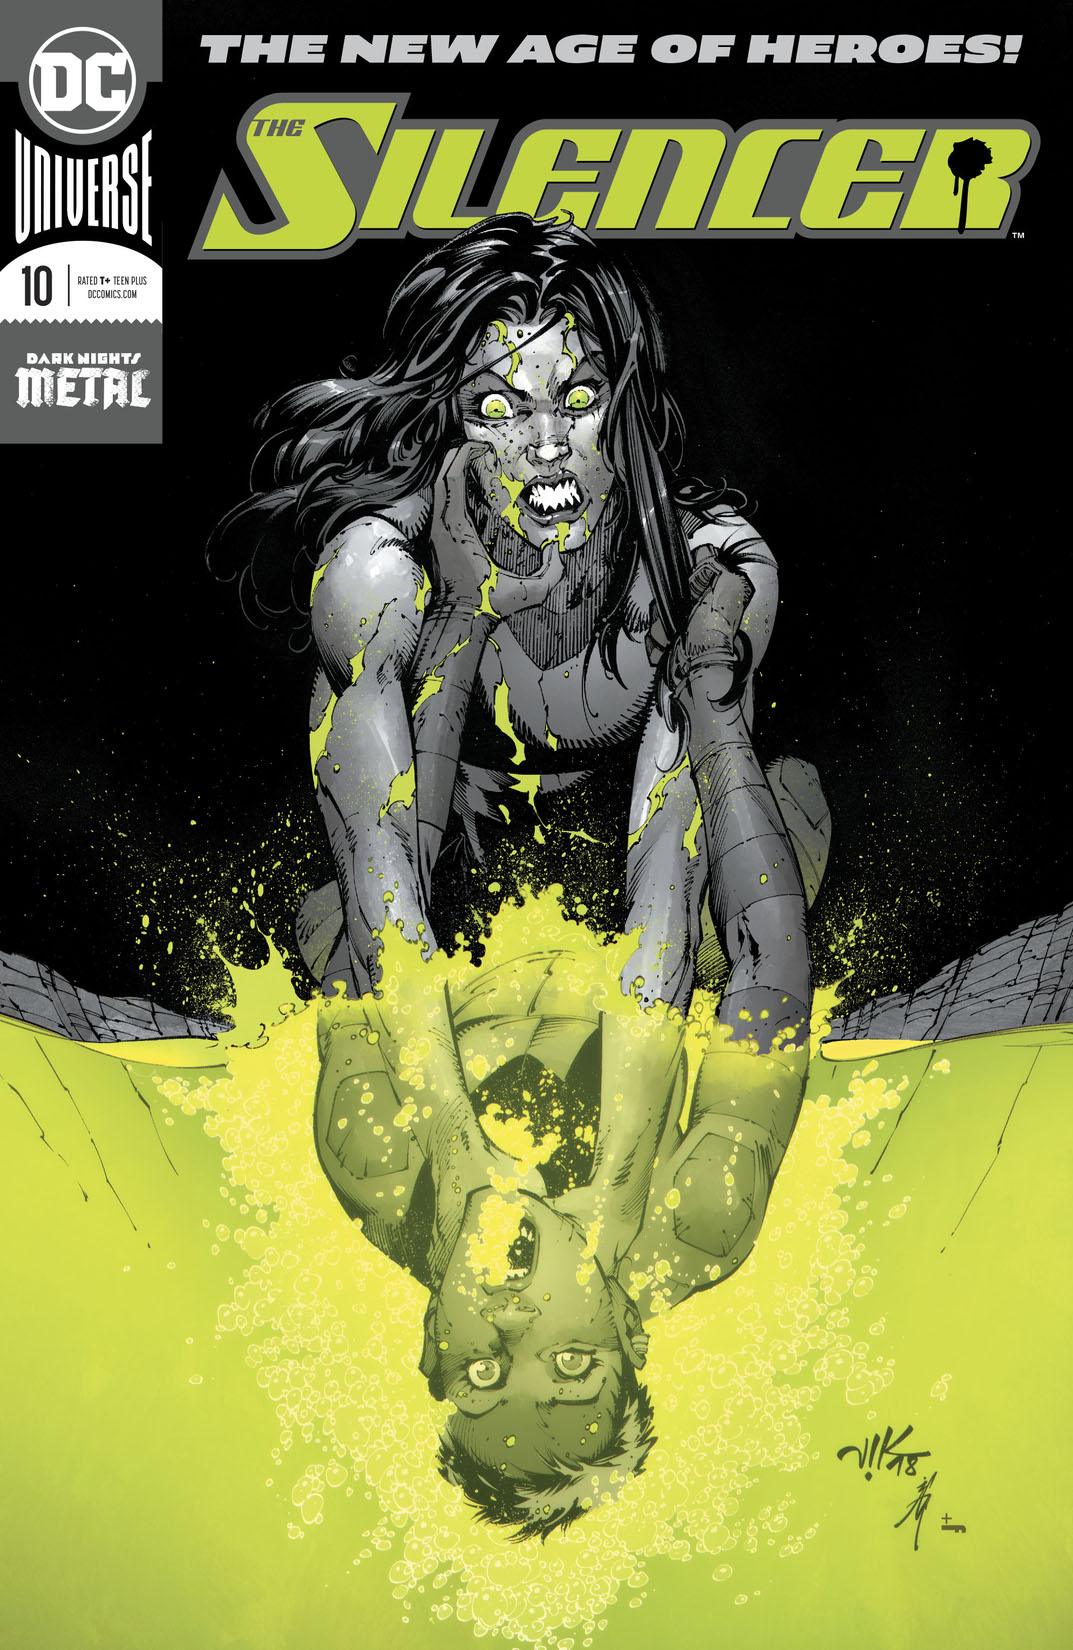 The Silencer #10 preview images